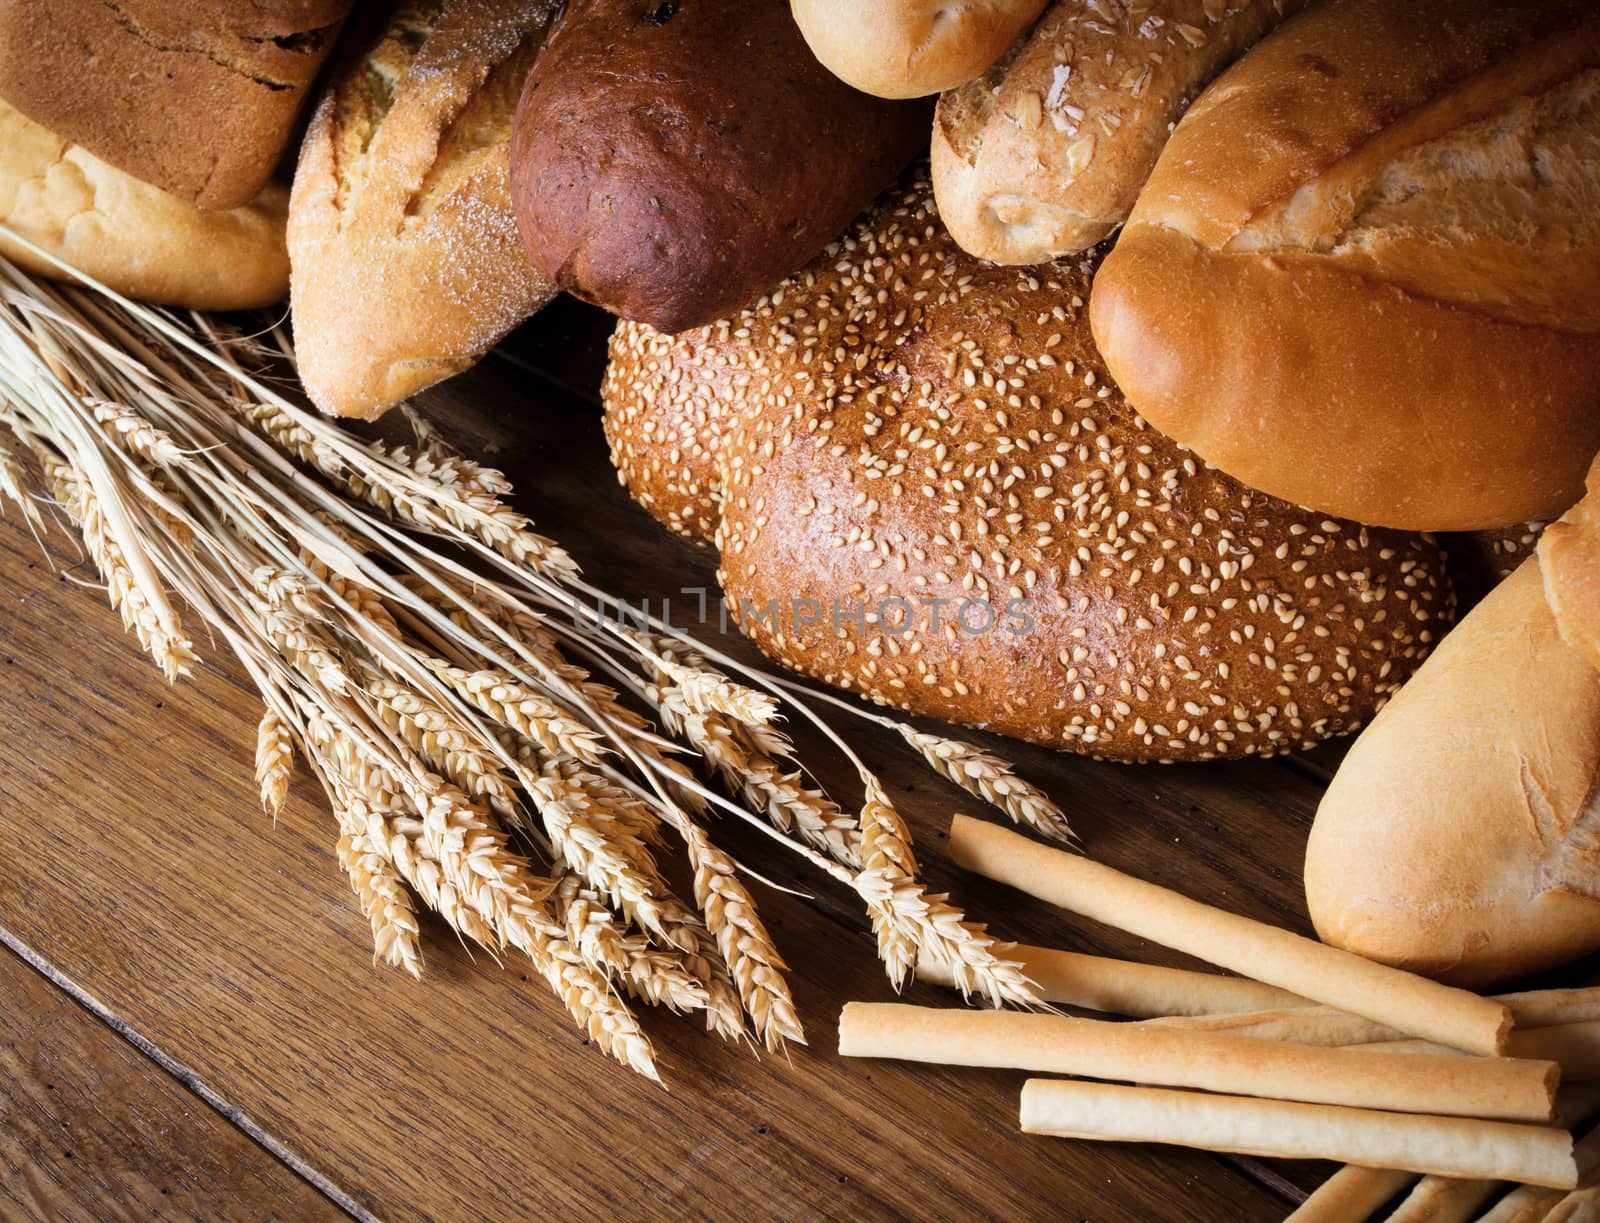 Assortment of bread on wooden background